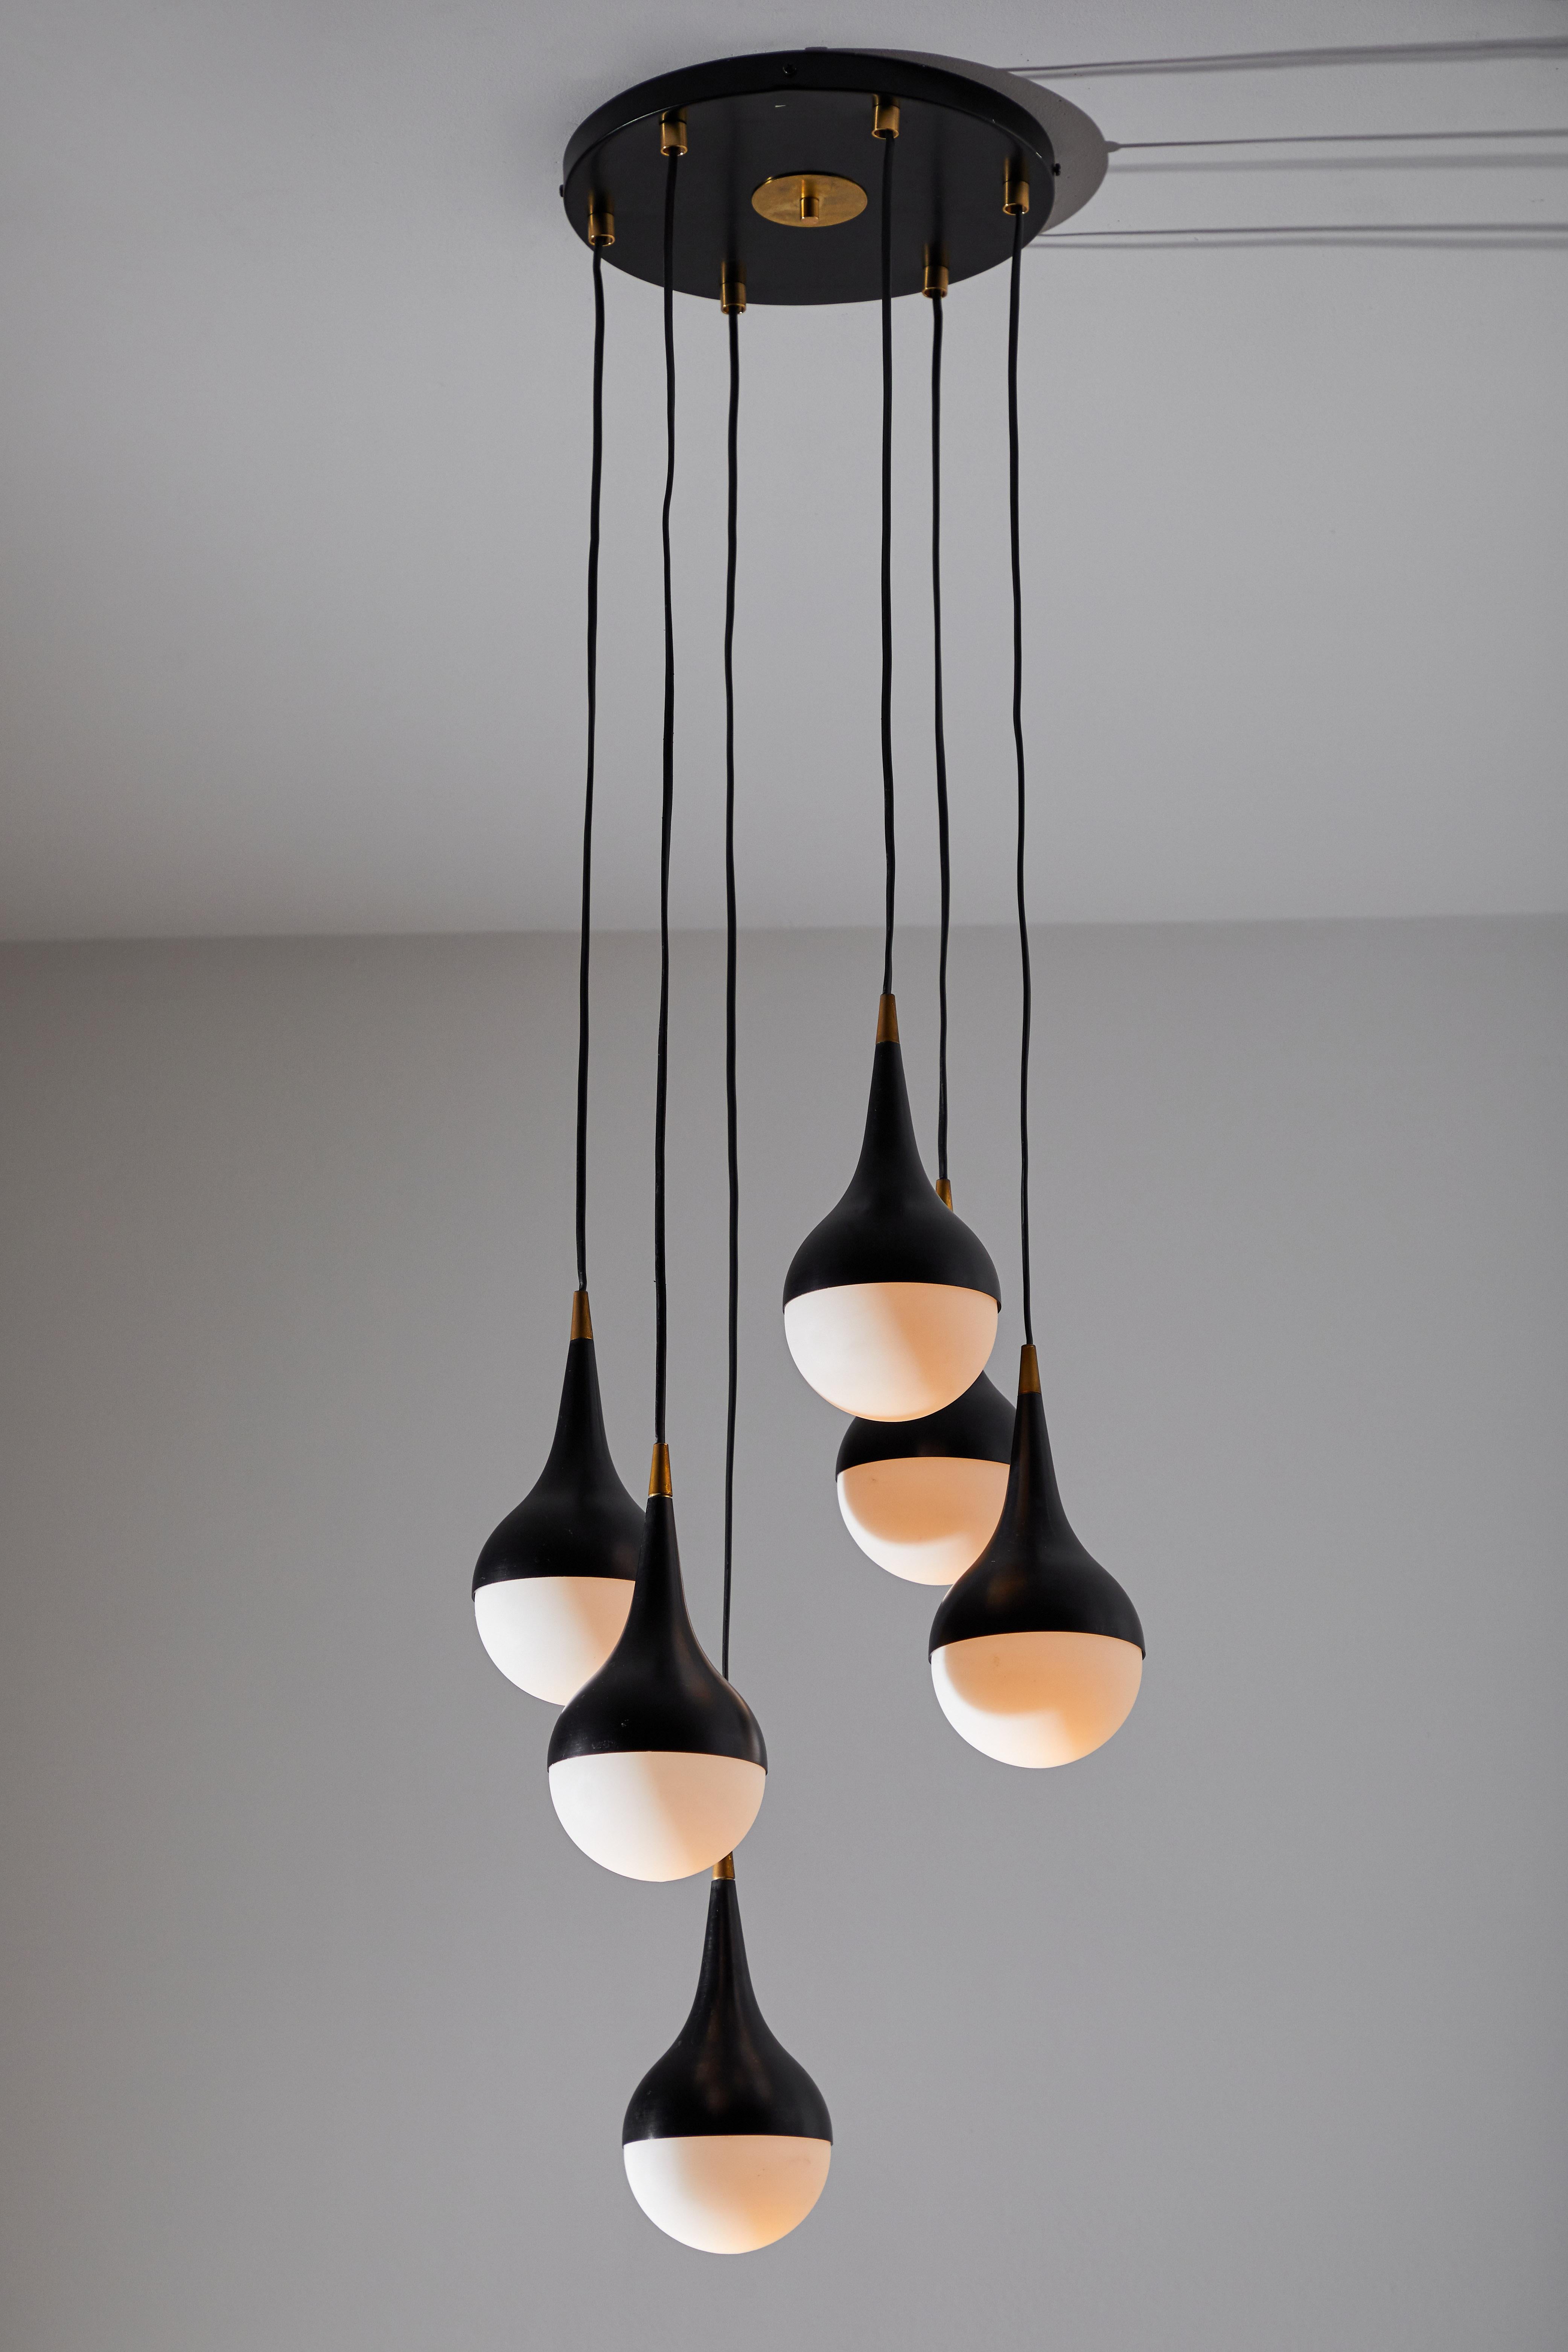 Suspension light by Stilnovo. Manufactured in Italy, circa 1960s. Enameled aluminum, brass hardware, brushed satin glass diffusers. Retains original manufacturer's label. Takes six E27 25 W maximum candelabra bulbs. Bulbs provided as a one time